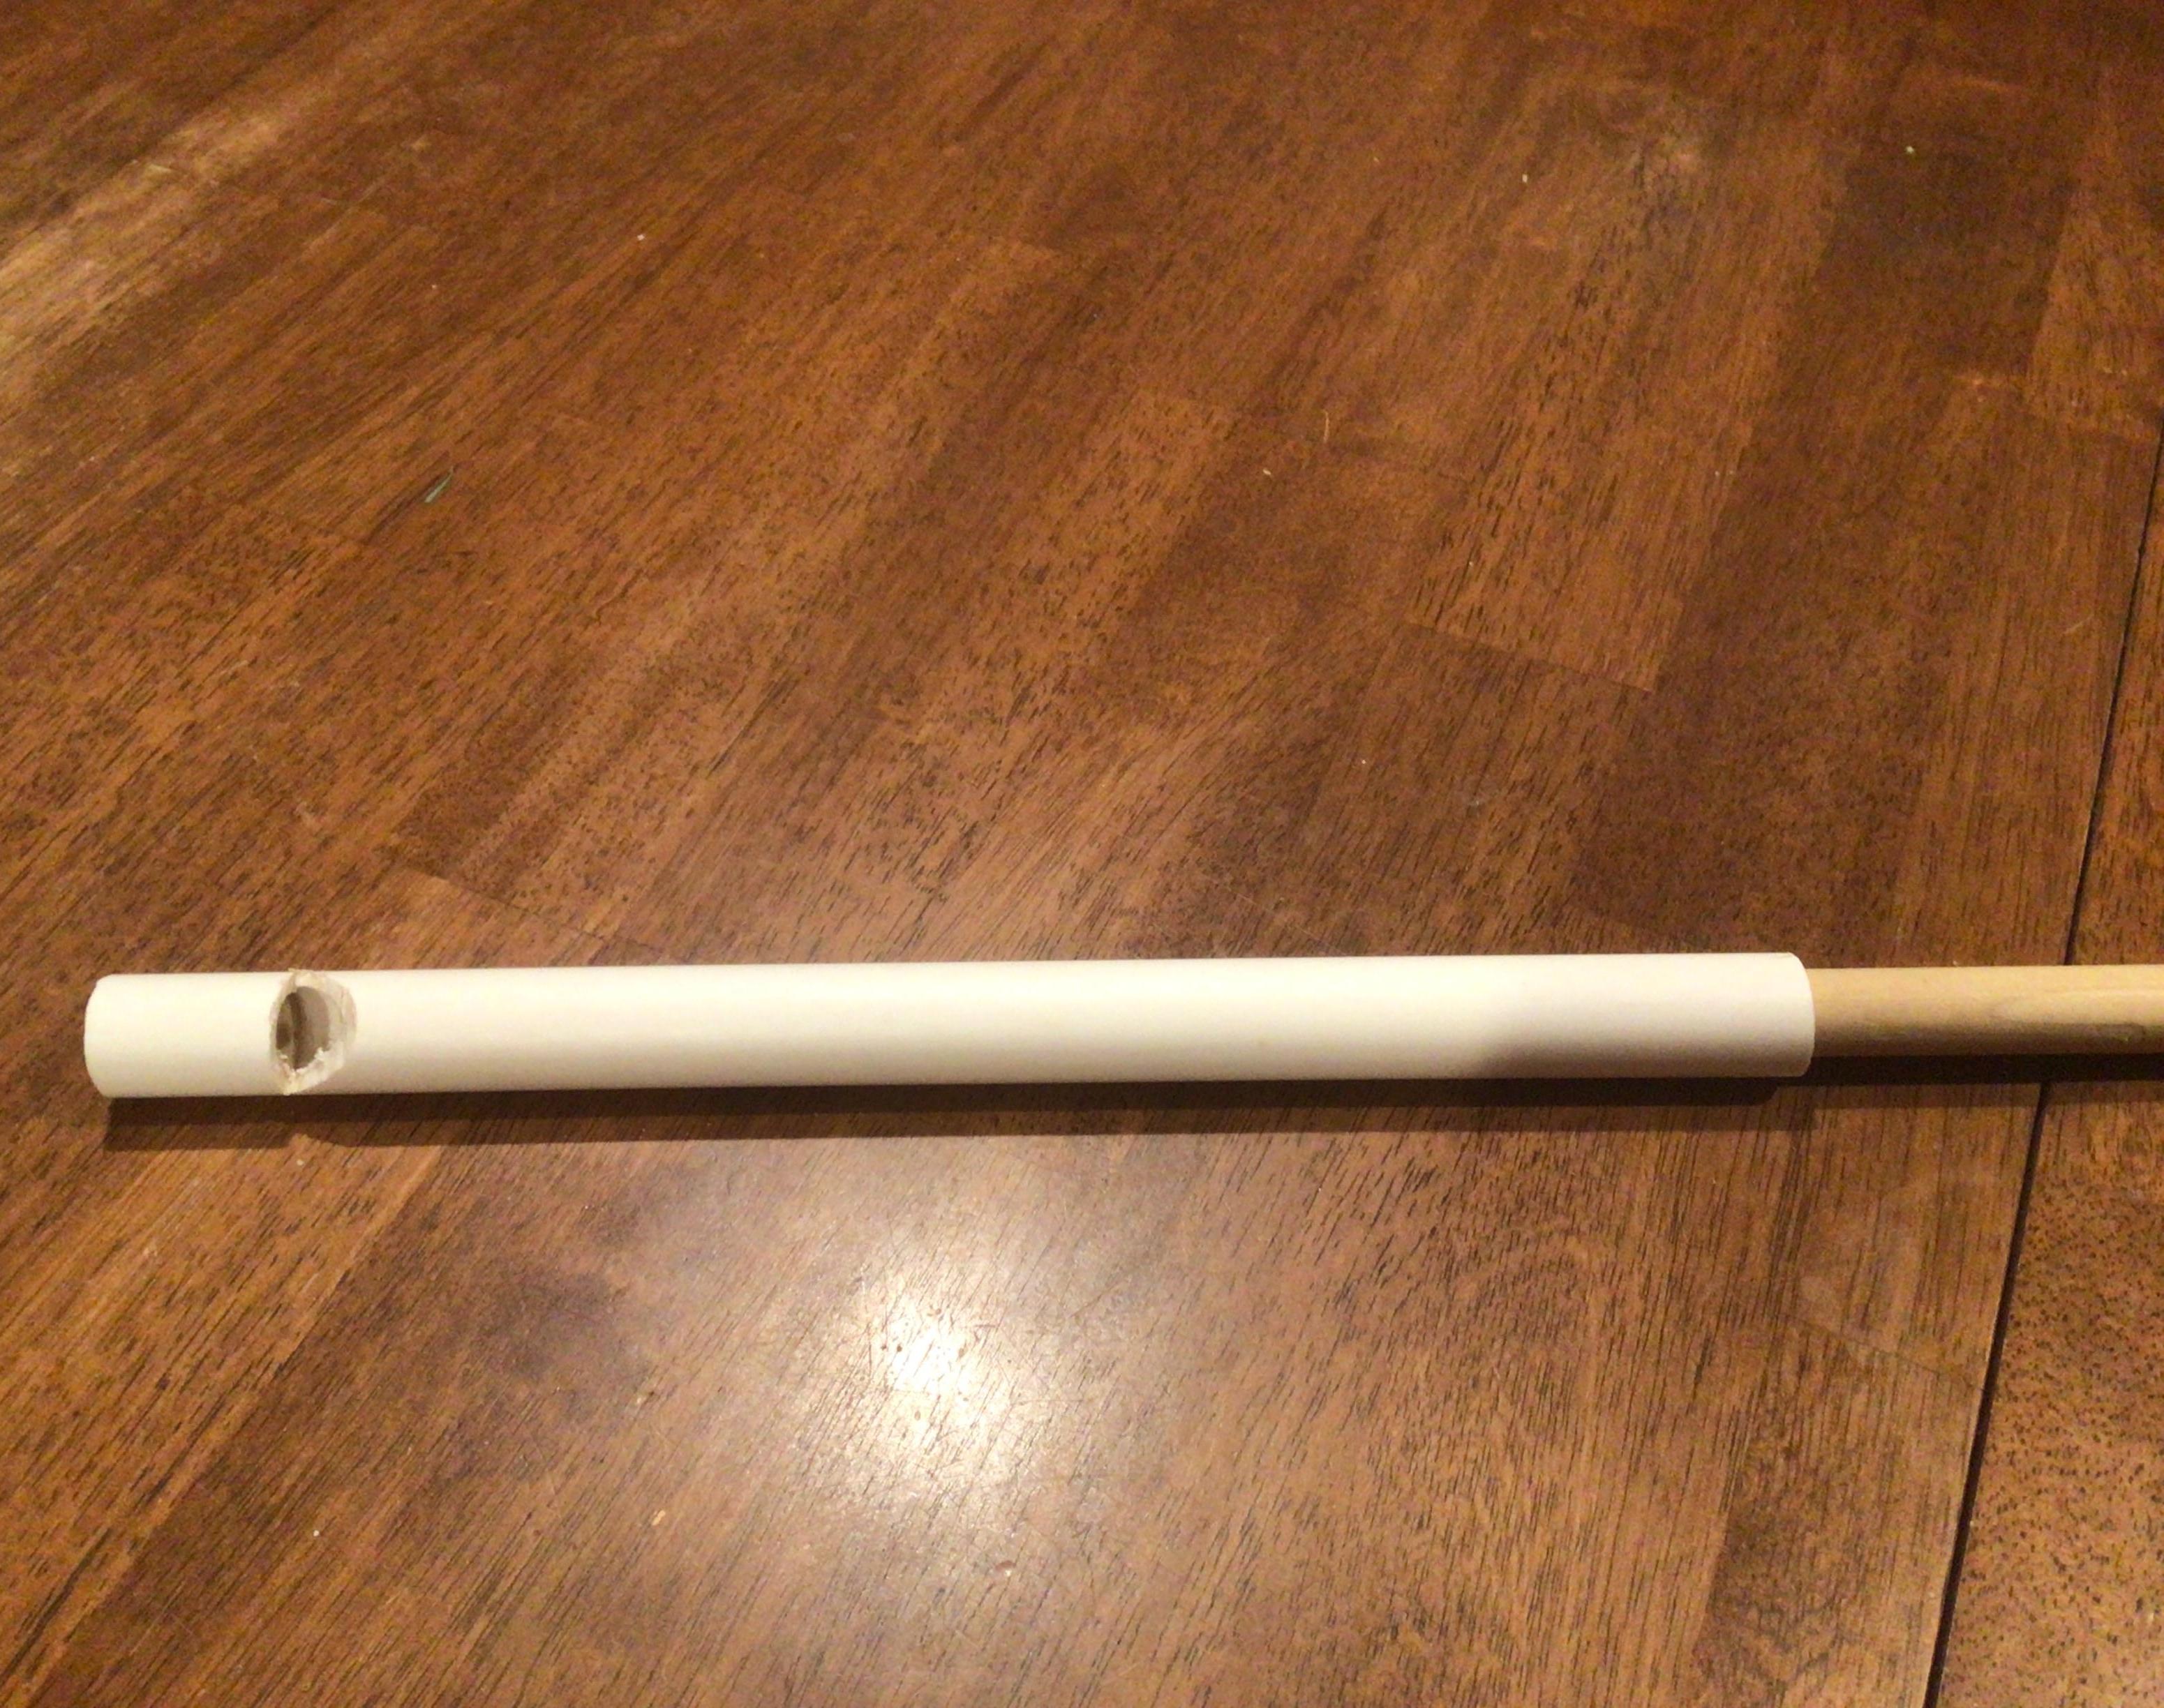 How to Make a Slide Whistle